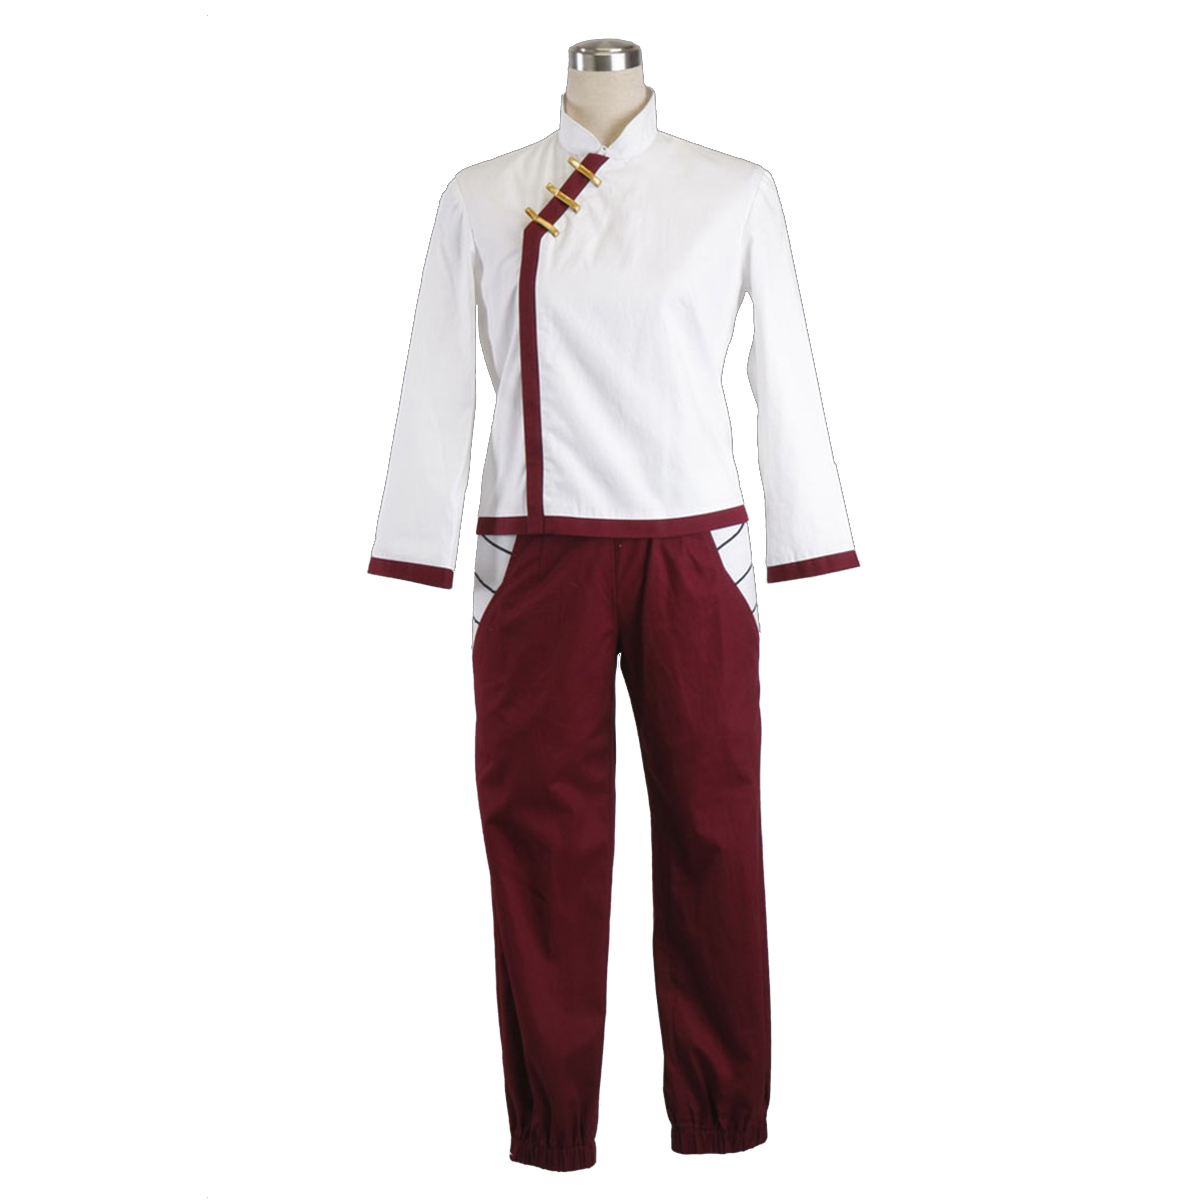 Naruto Shippuden Tenten 2 Anime Cosplay Costumes Outfit